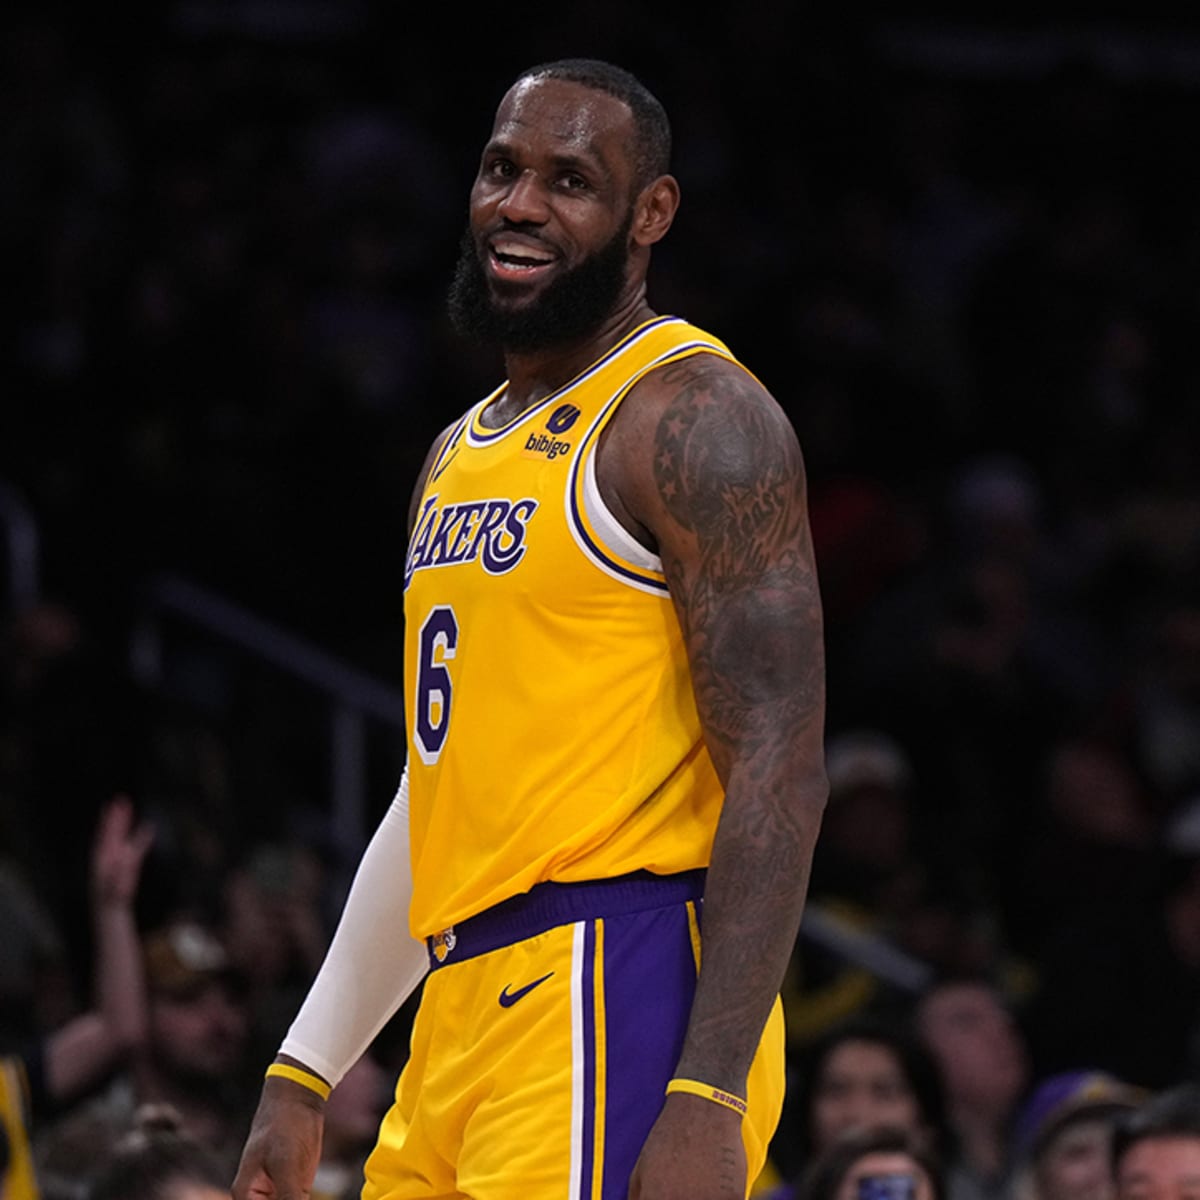 Simply the best: Phillies' Bryce Harper passes Lakers' LeBron